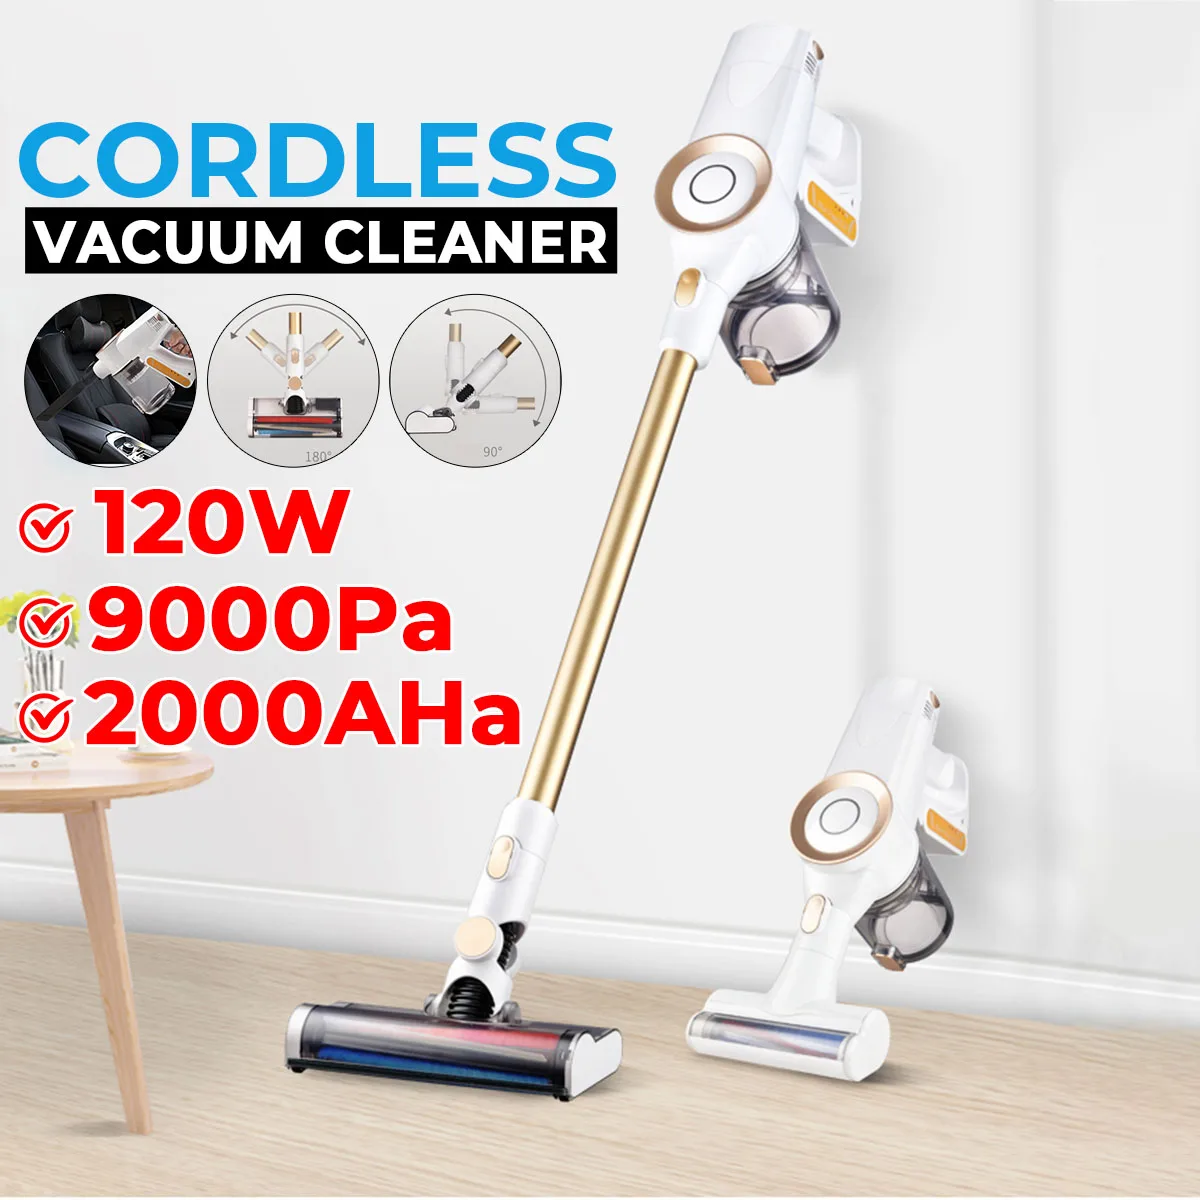 

9000PA 2 In 1 Vacuum Cleaner Handheld Wireless Sweeping Cleaning Strong Dust Collector for Home Carpet Cyclone Suction Aspirator